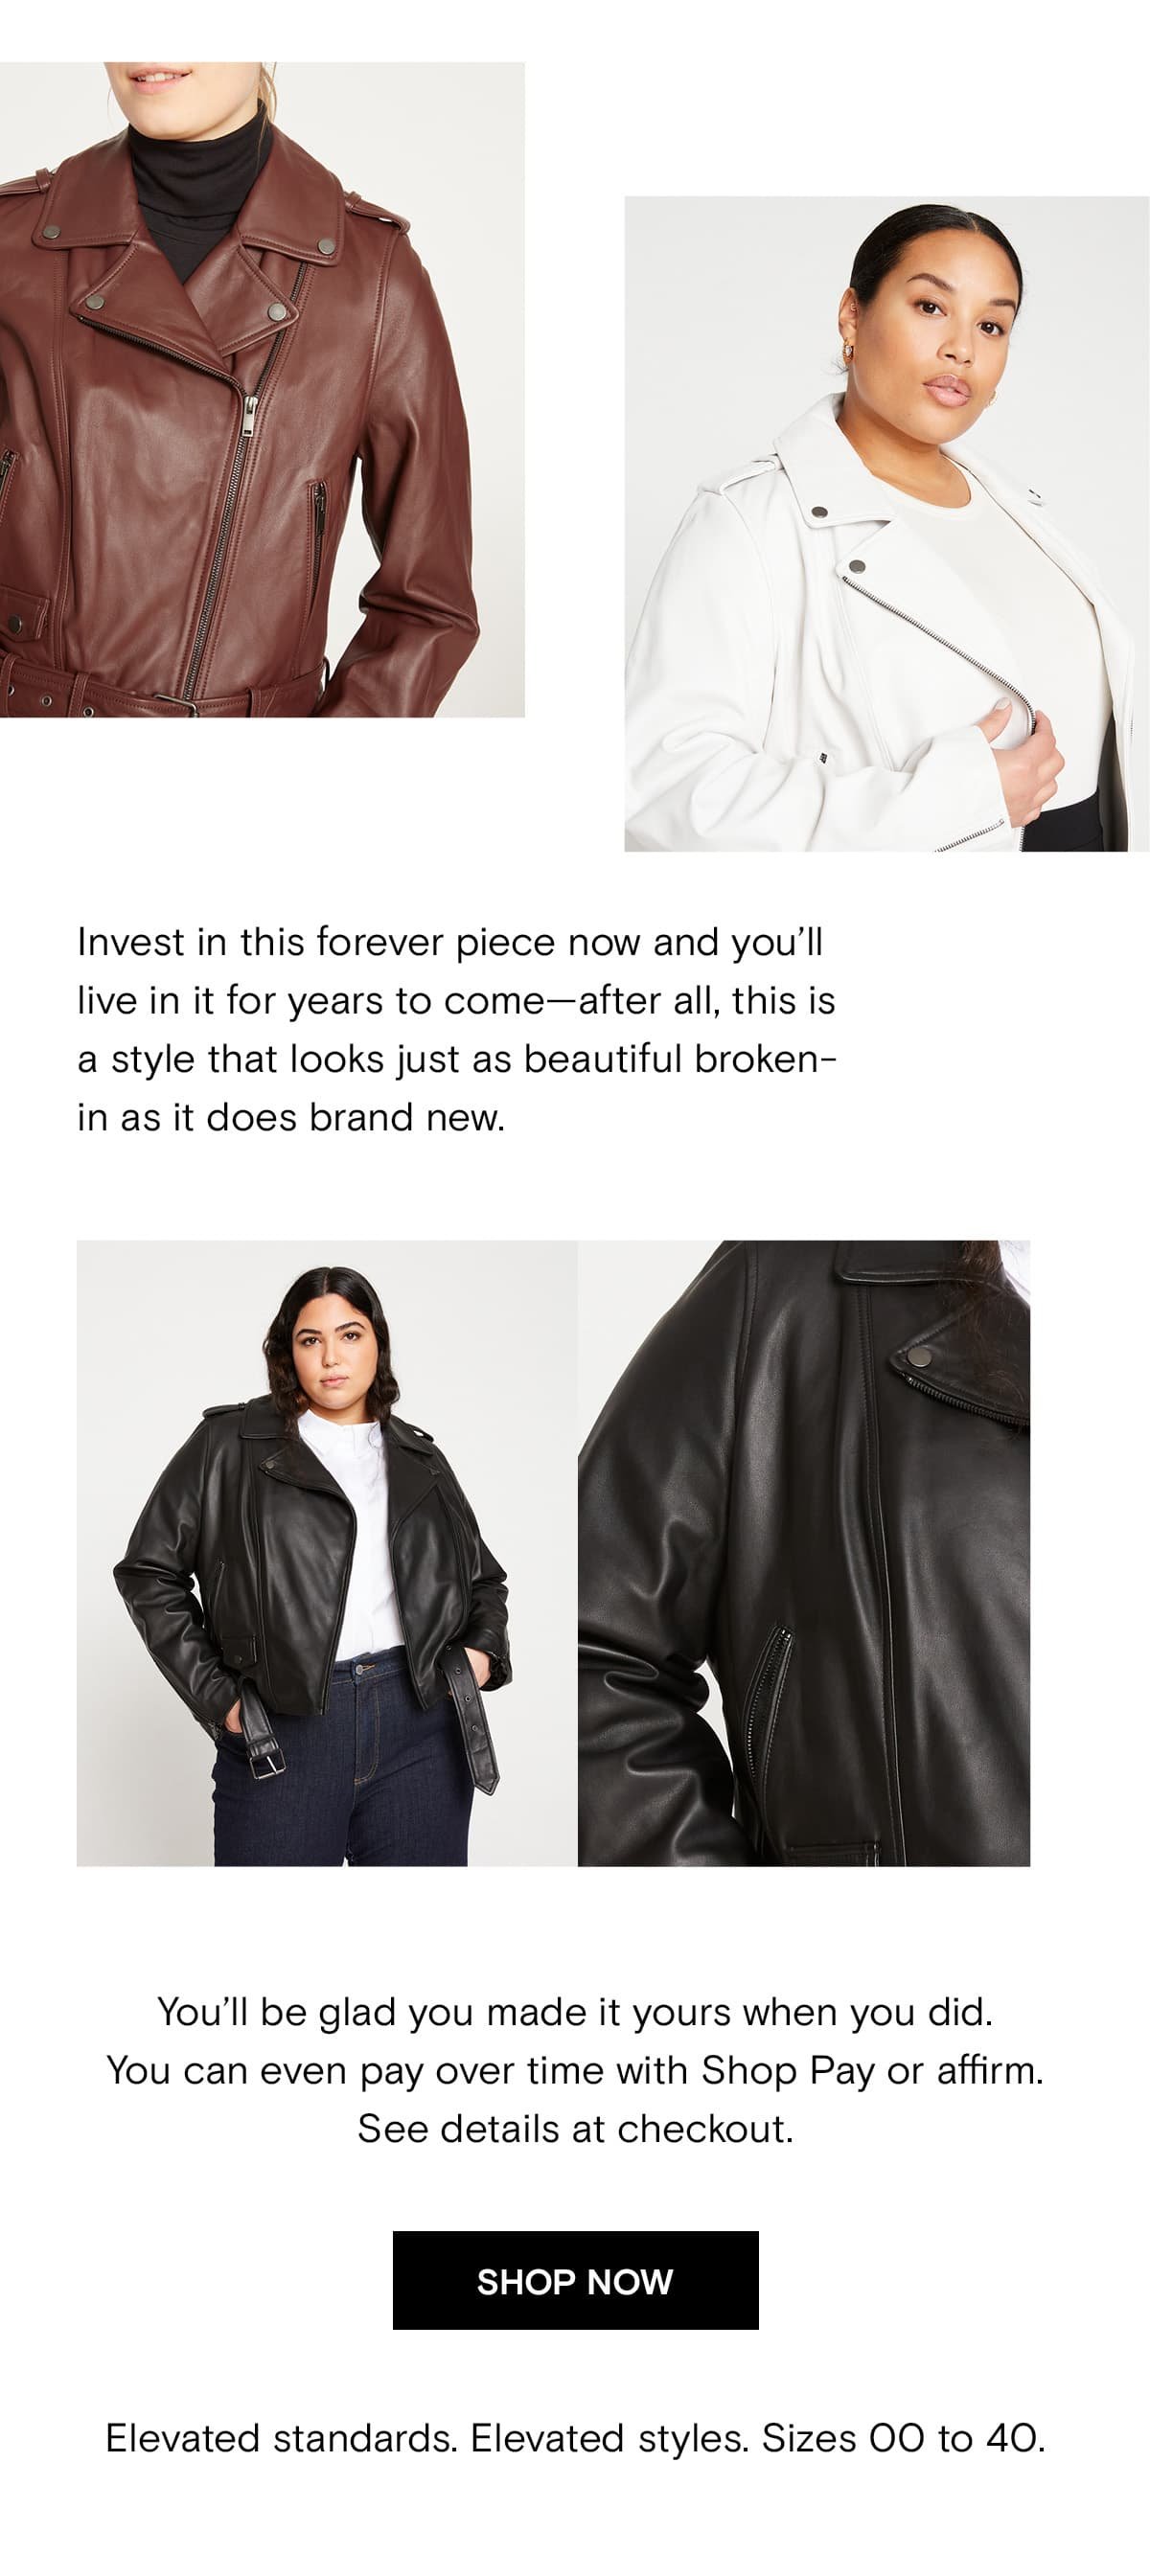 Invest in this forever piece now and you'll live in it for years to come—after all, this is a style that looks just as beautiful broken-in as it does brand new.